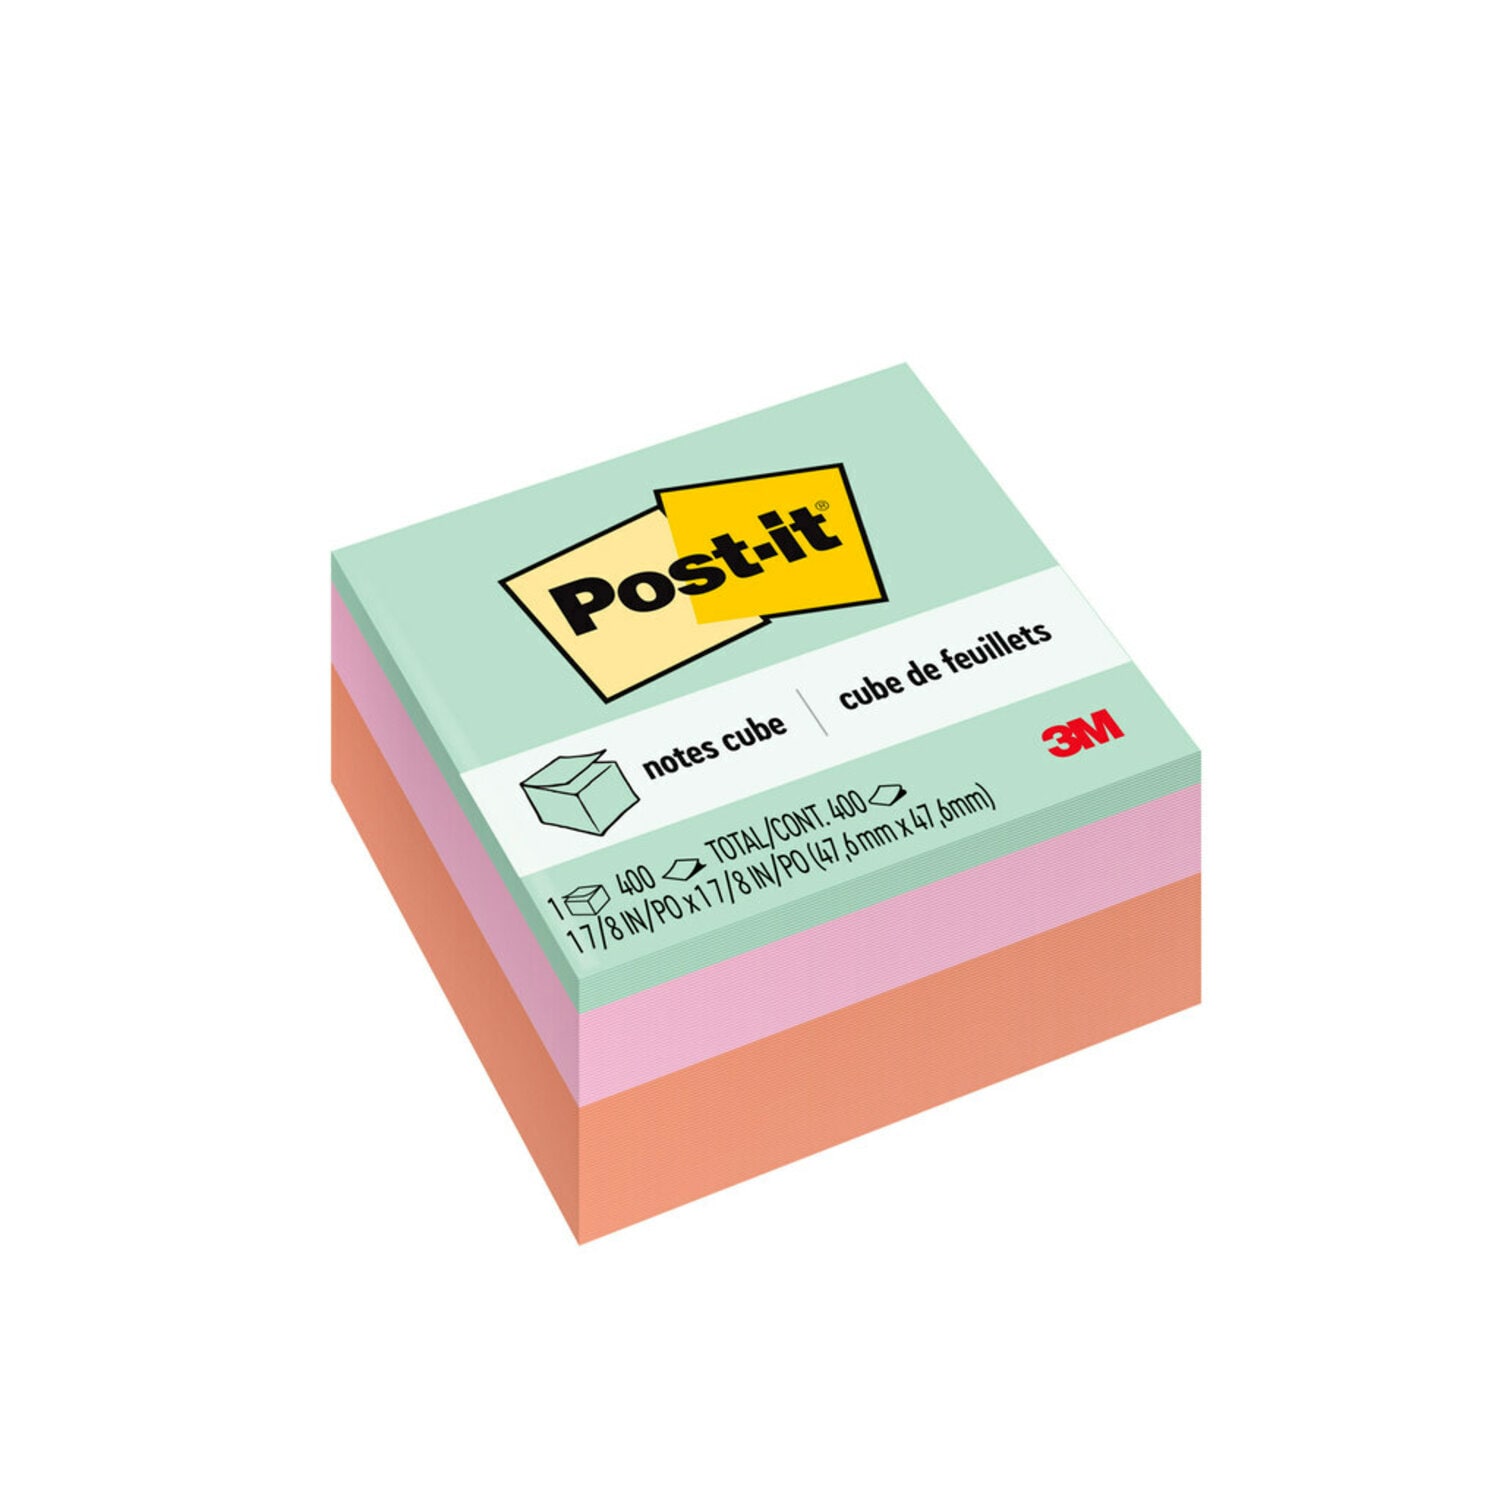 7100259254 - Post-it Notes Cube 2051-PAS, 1 7/8 in x 1 7/8 in (47.6 mm x 47.6 mm)